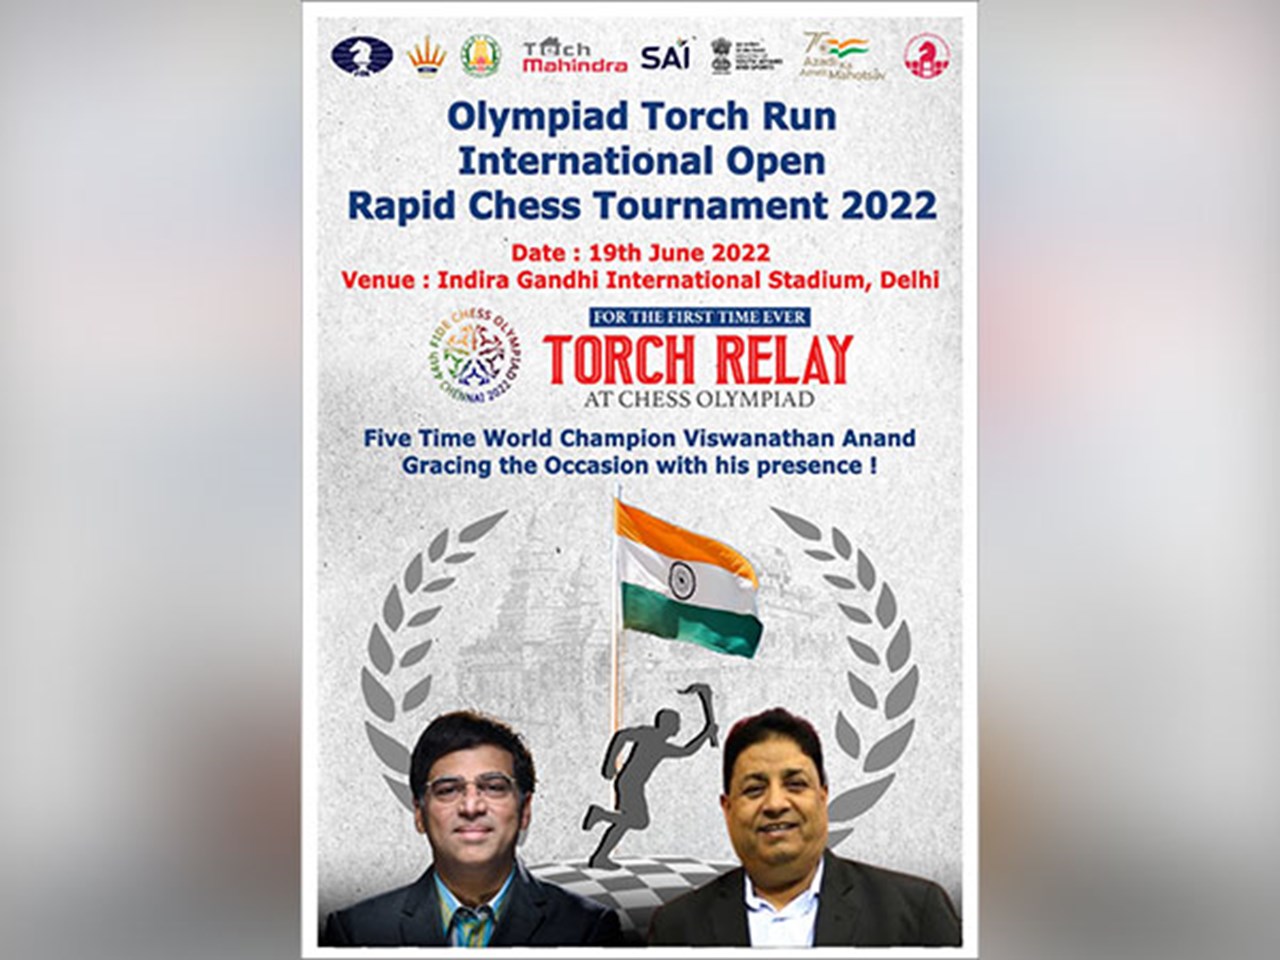 AICF celebrates Olympiad Torch Relay with International Open Rapid